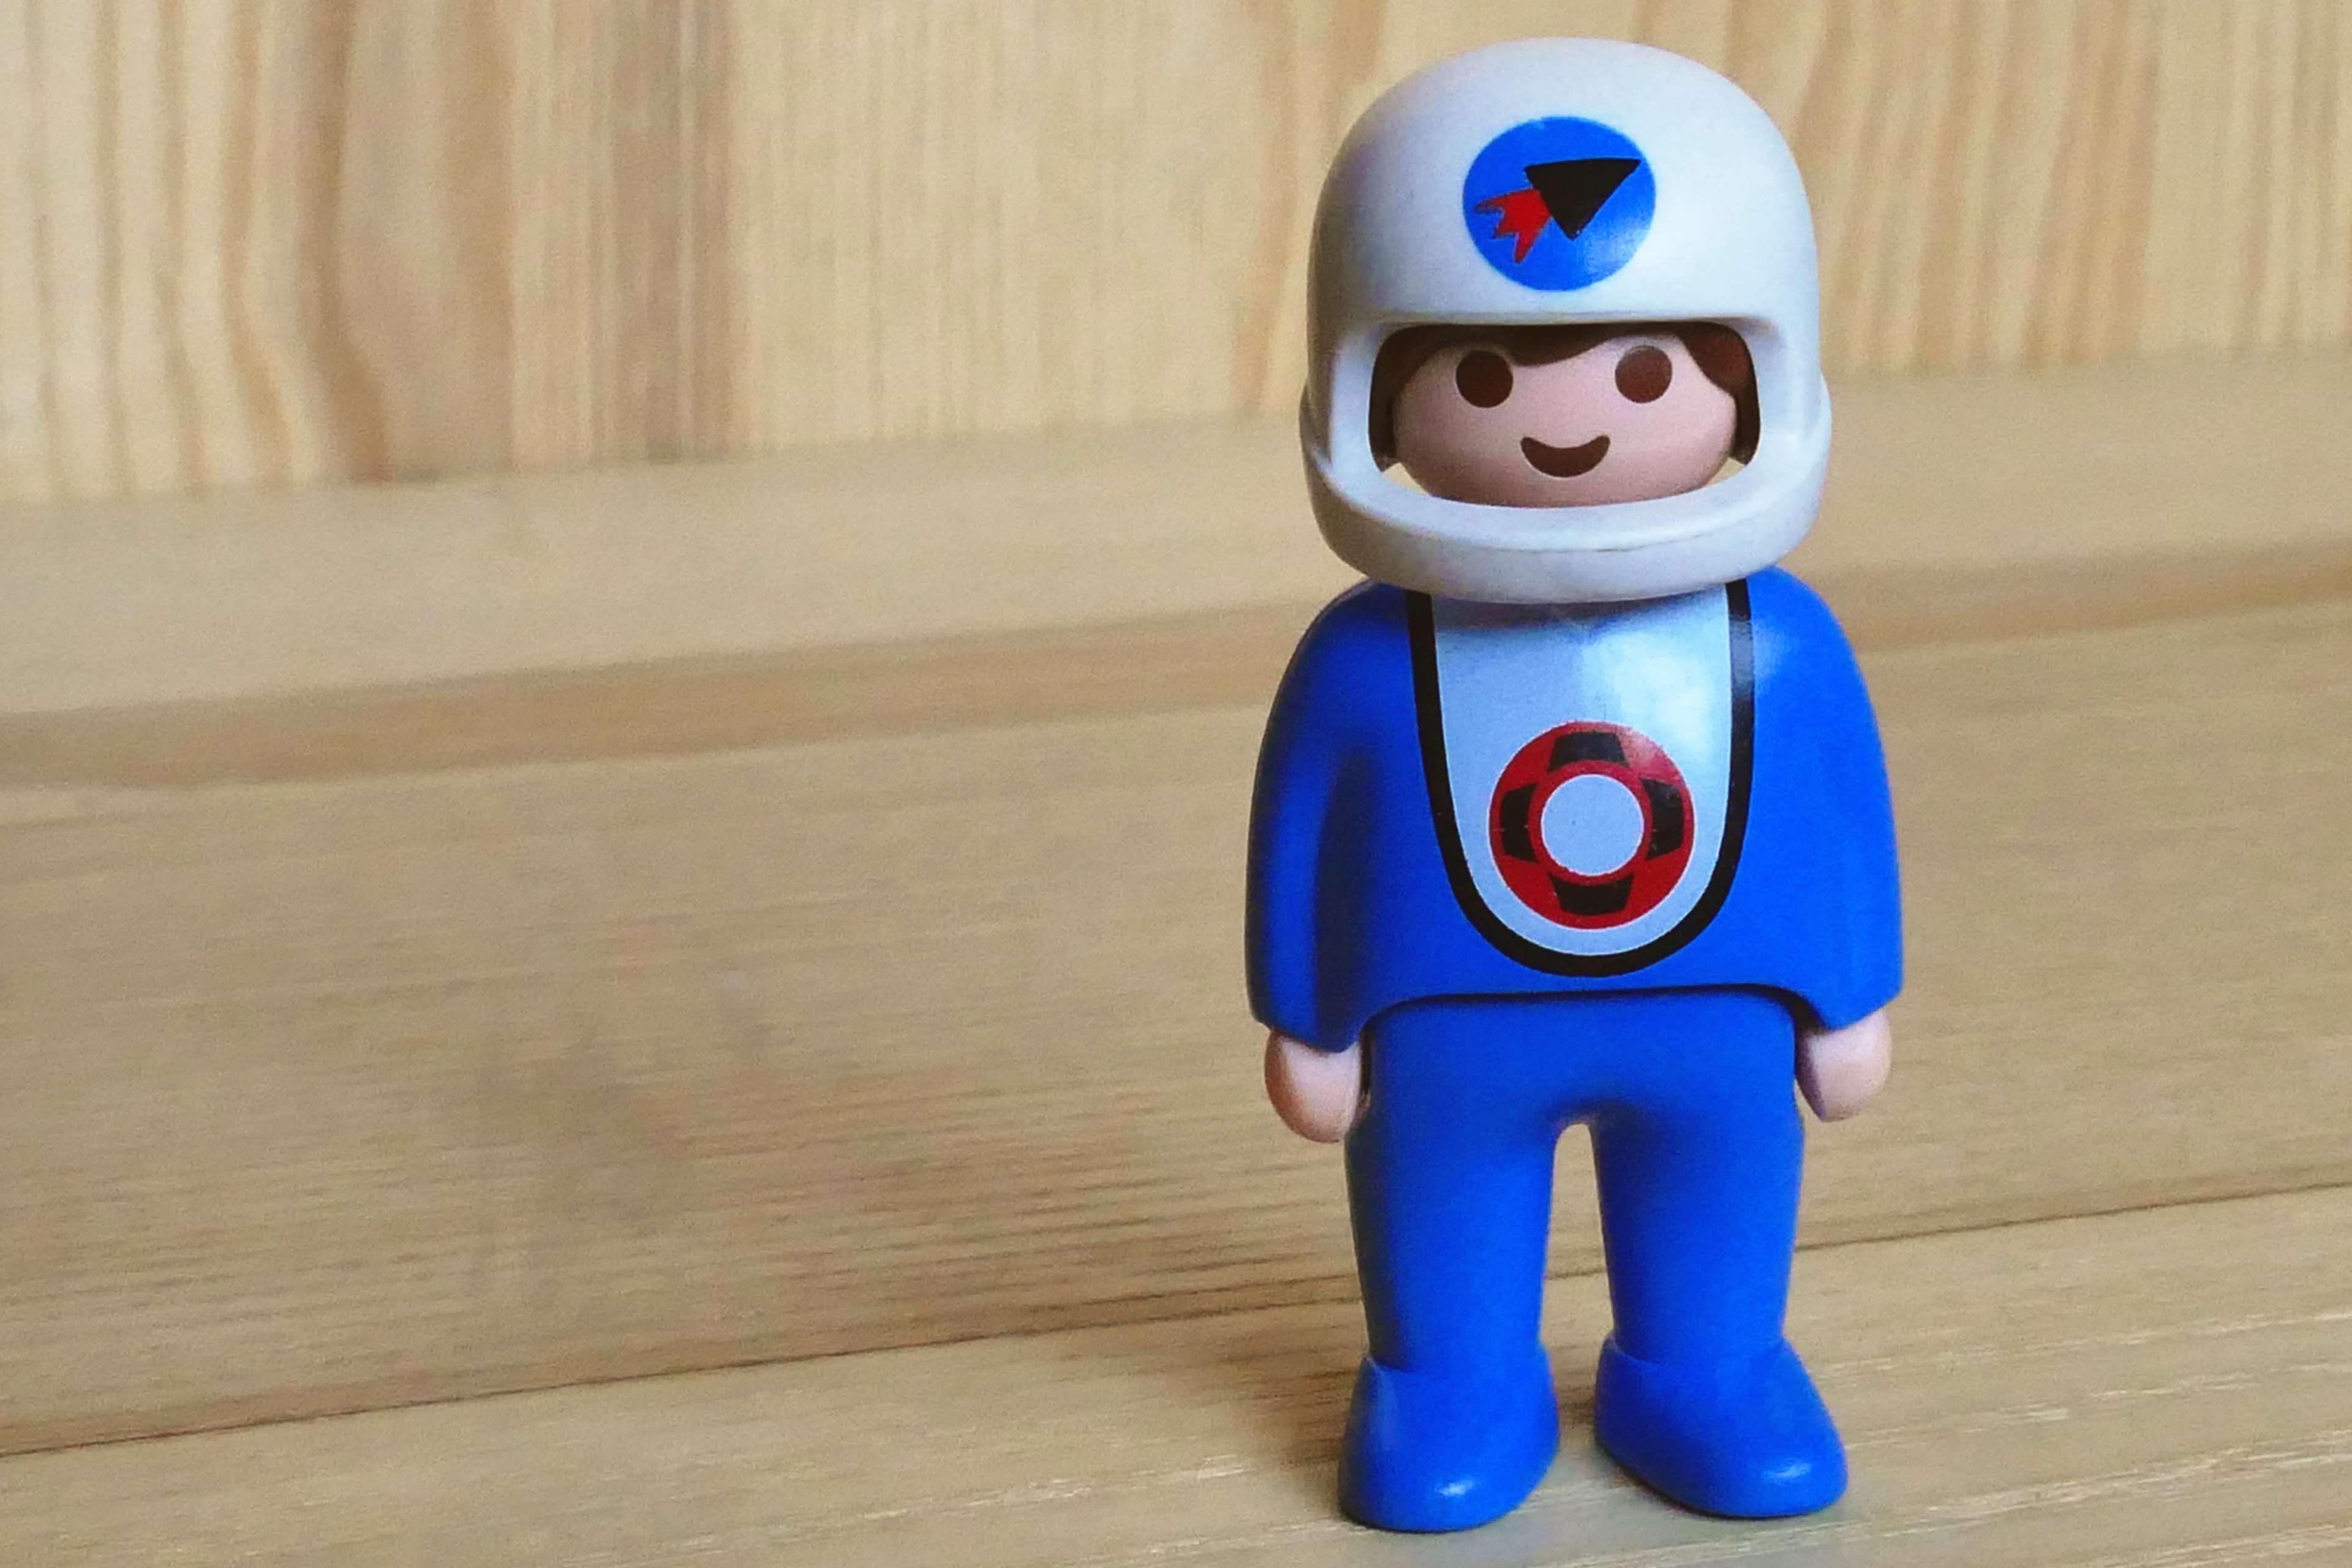 action figure #children #figure #fun #games #kids #kids toy #man #minifigure #play #playing #space #space suit. Mini figures, Fun games for kids, Action figures